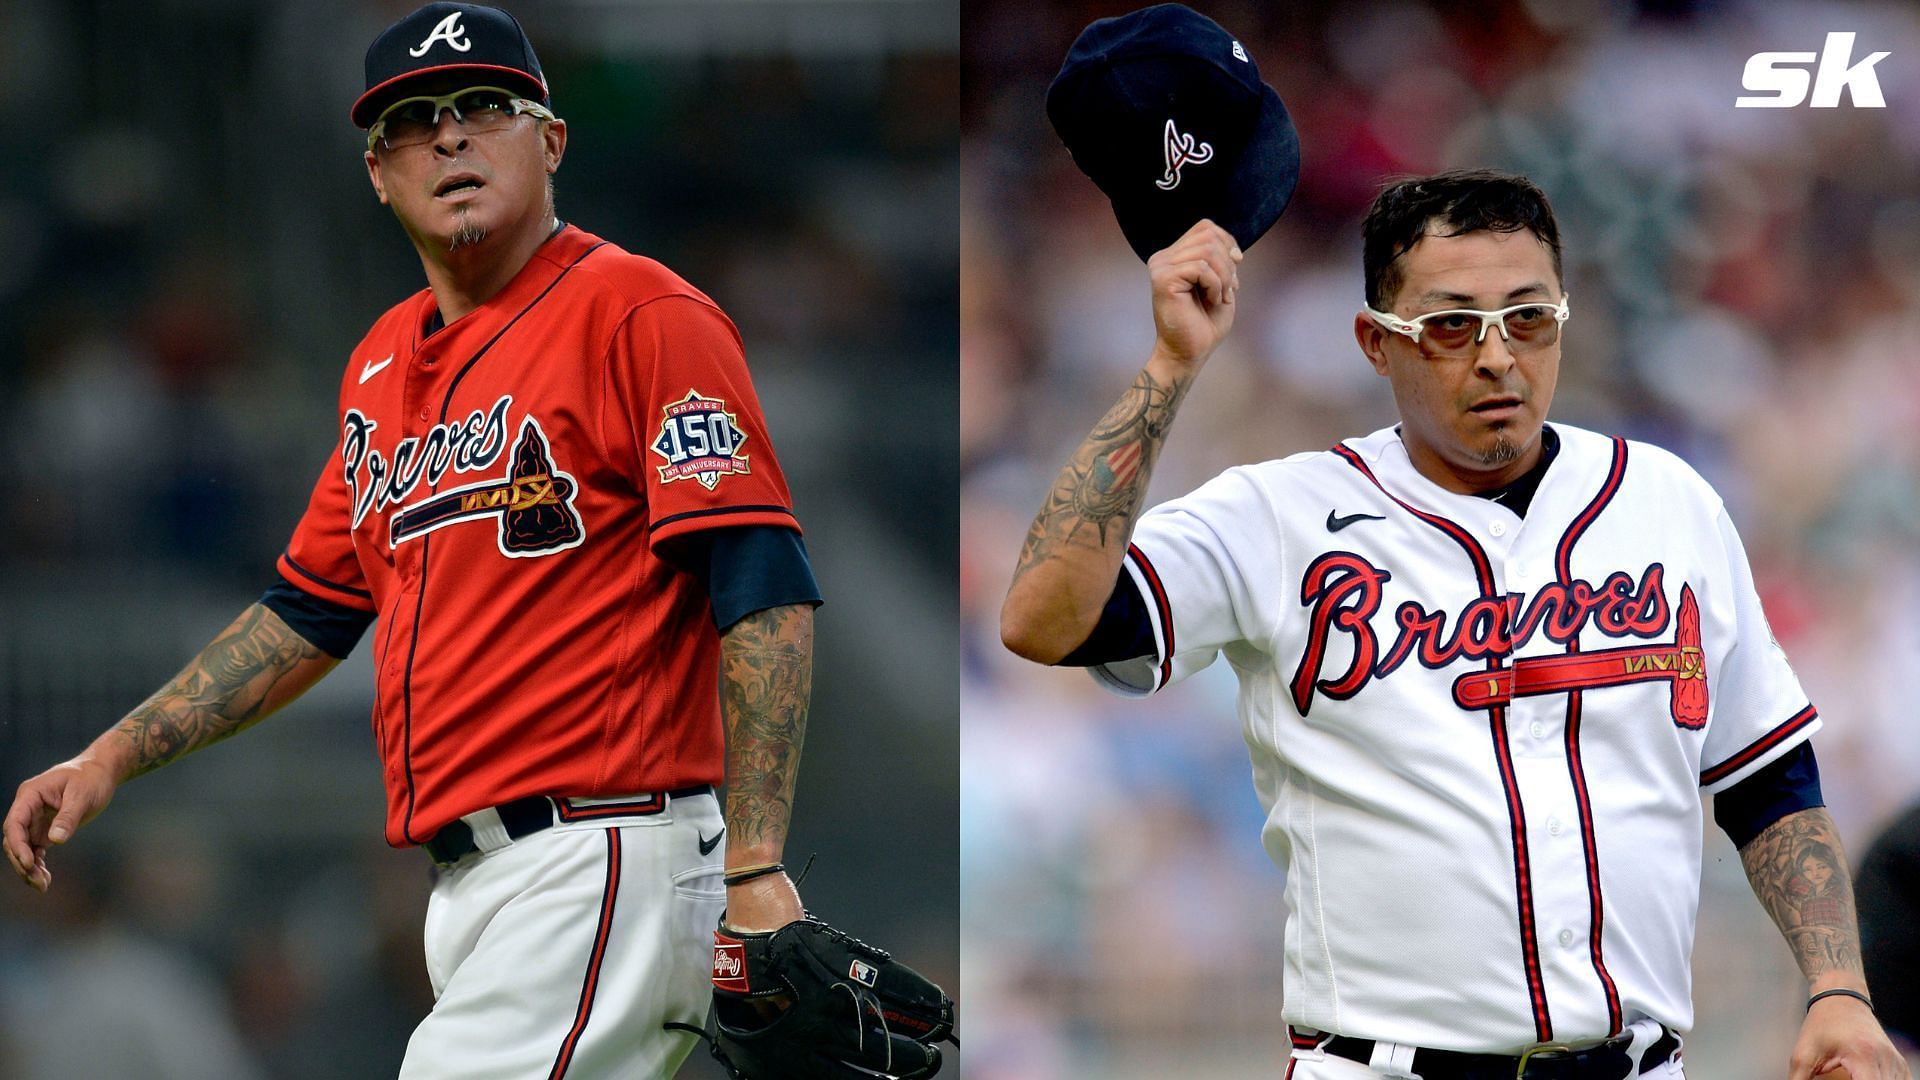 Jesse Chavez all set to make the Braves return amid high hopes from fans:  “The Cavalry's coming!!”